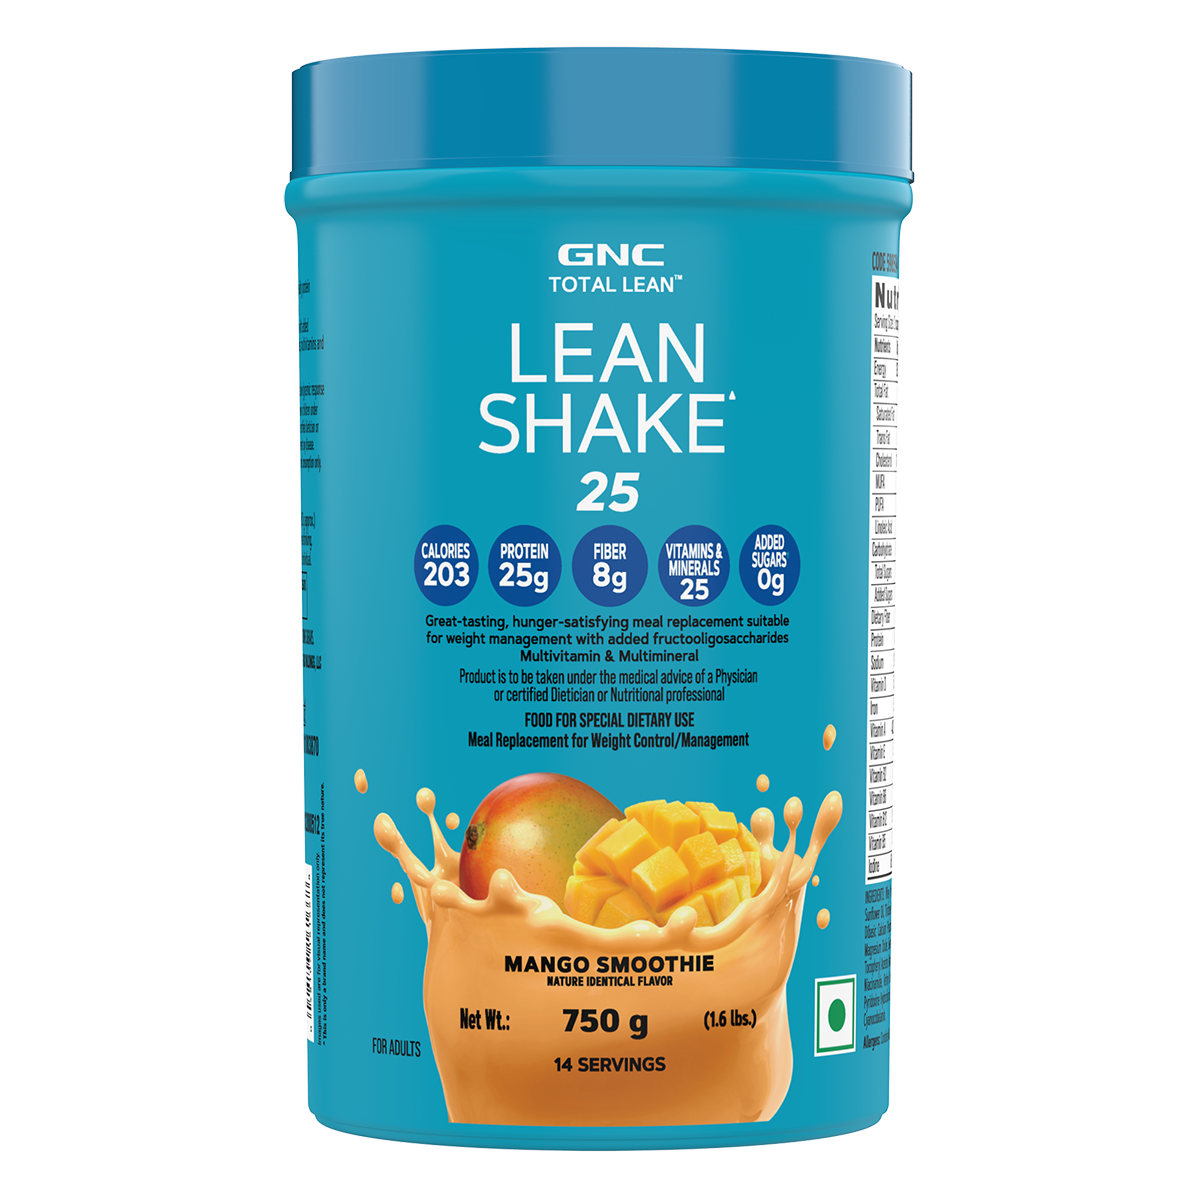 GNC Total Lean® Lean Shake™ 25 - Healthy Weight-Loss Meal Replacer with Balanced Nutrition